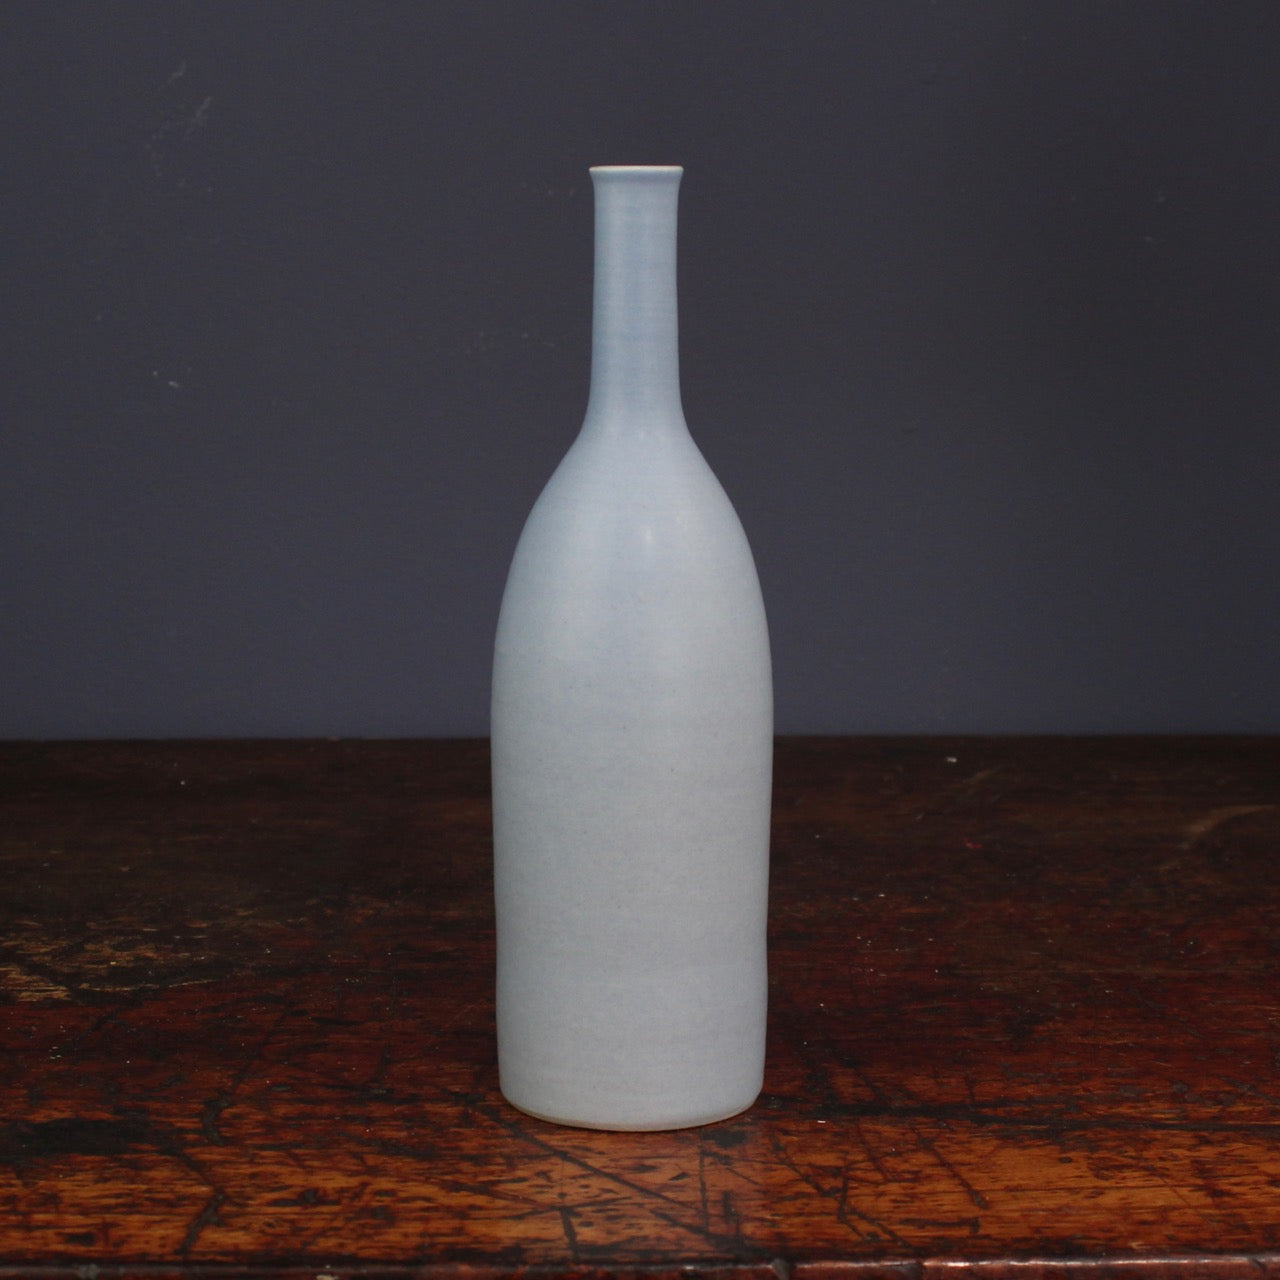 pale blue bottle by Lucy Burley on a wooden table